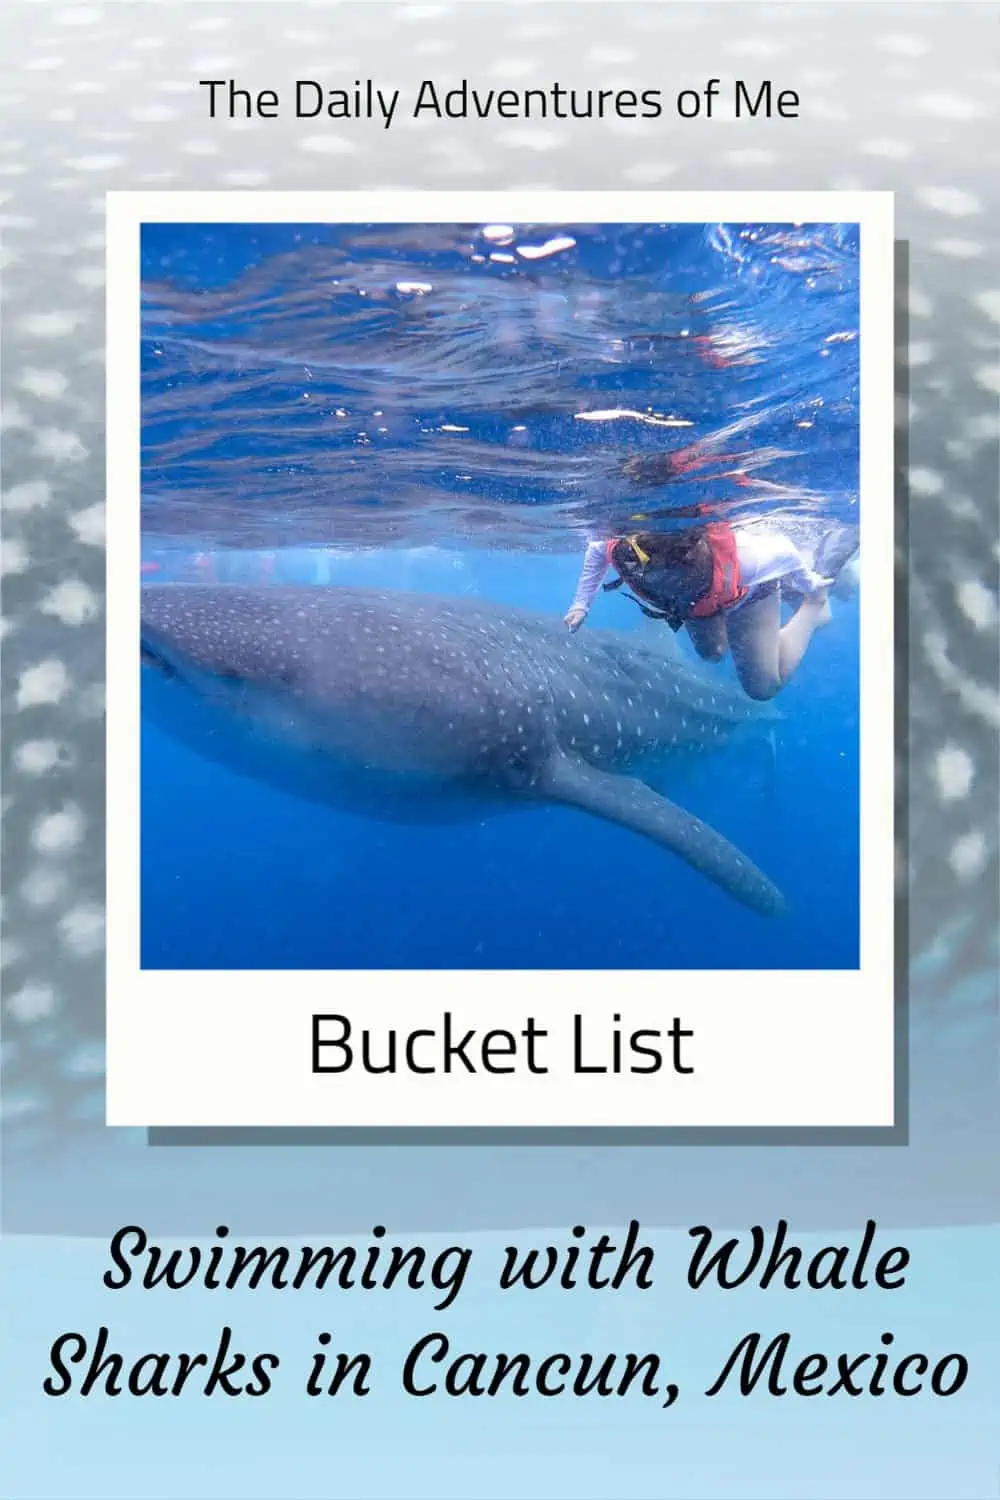 Read on for all the details to place your whale shark swim adventure from the Yucatan, Mexico. #Mexicobucketlist #thingsstodoinMexico